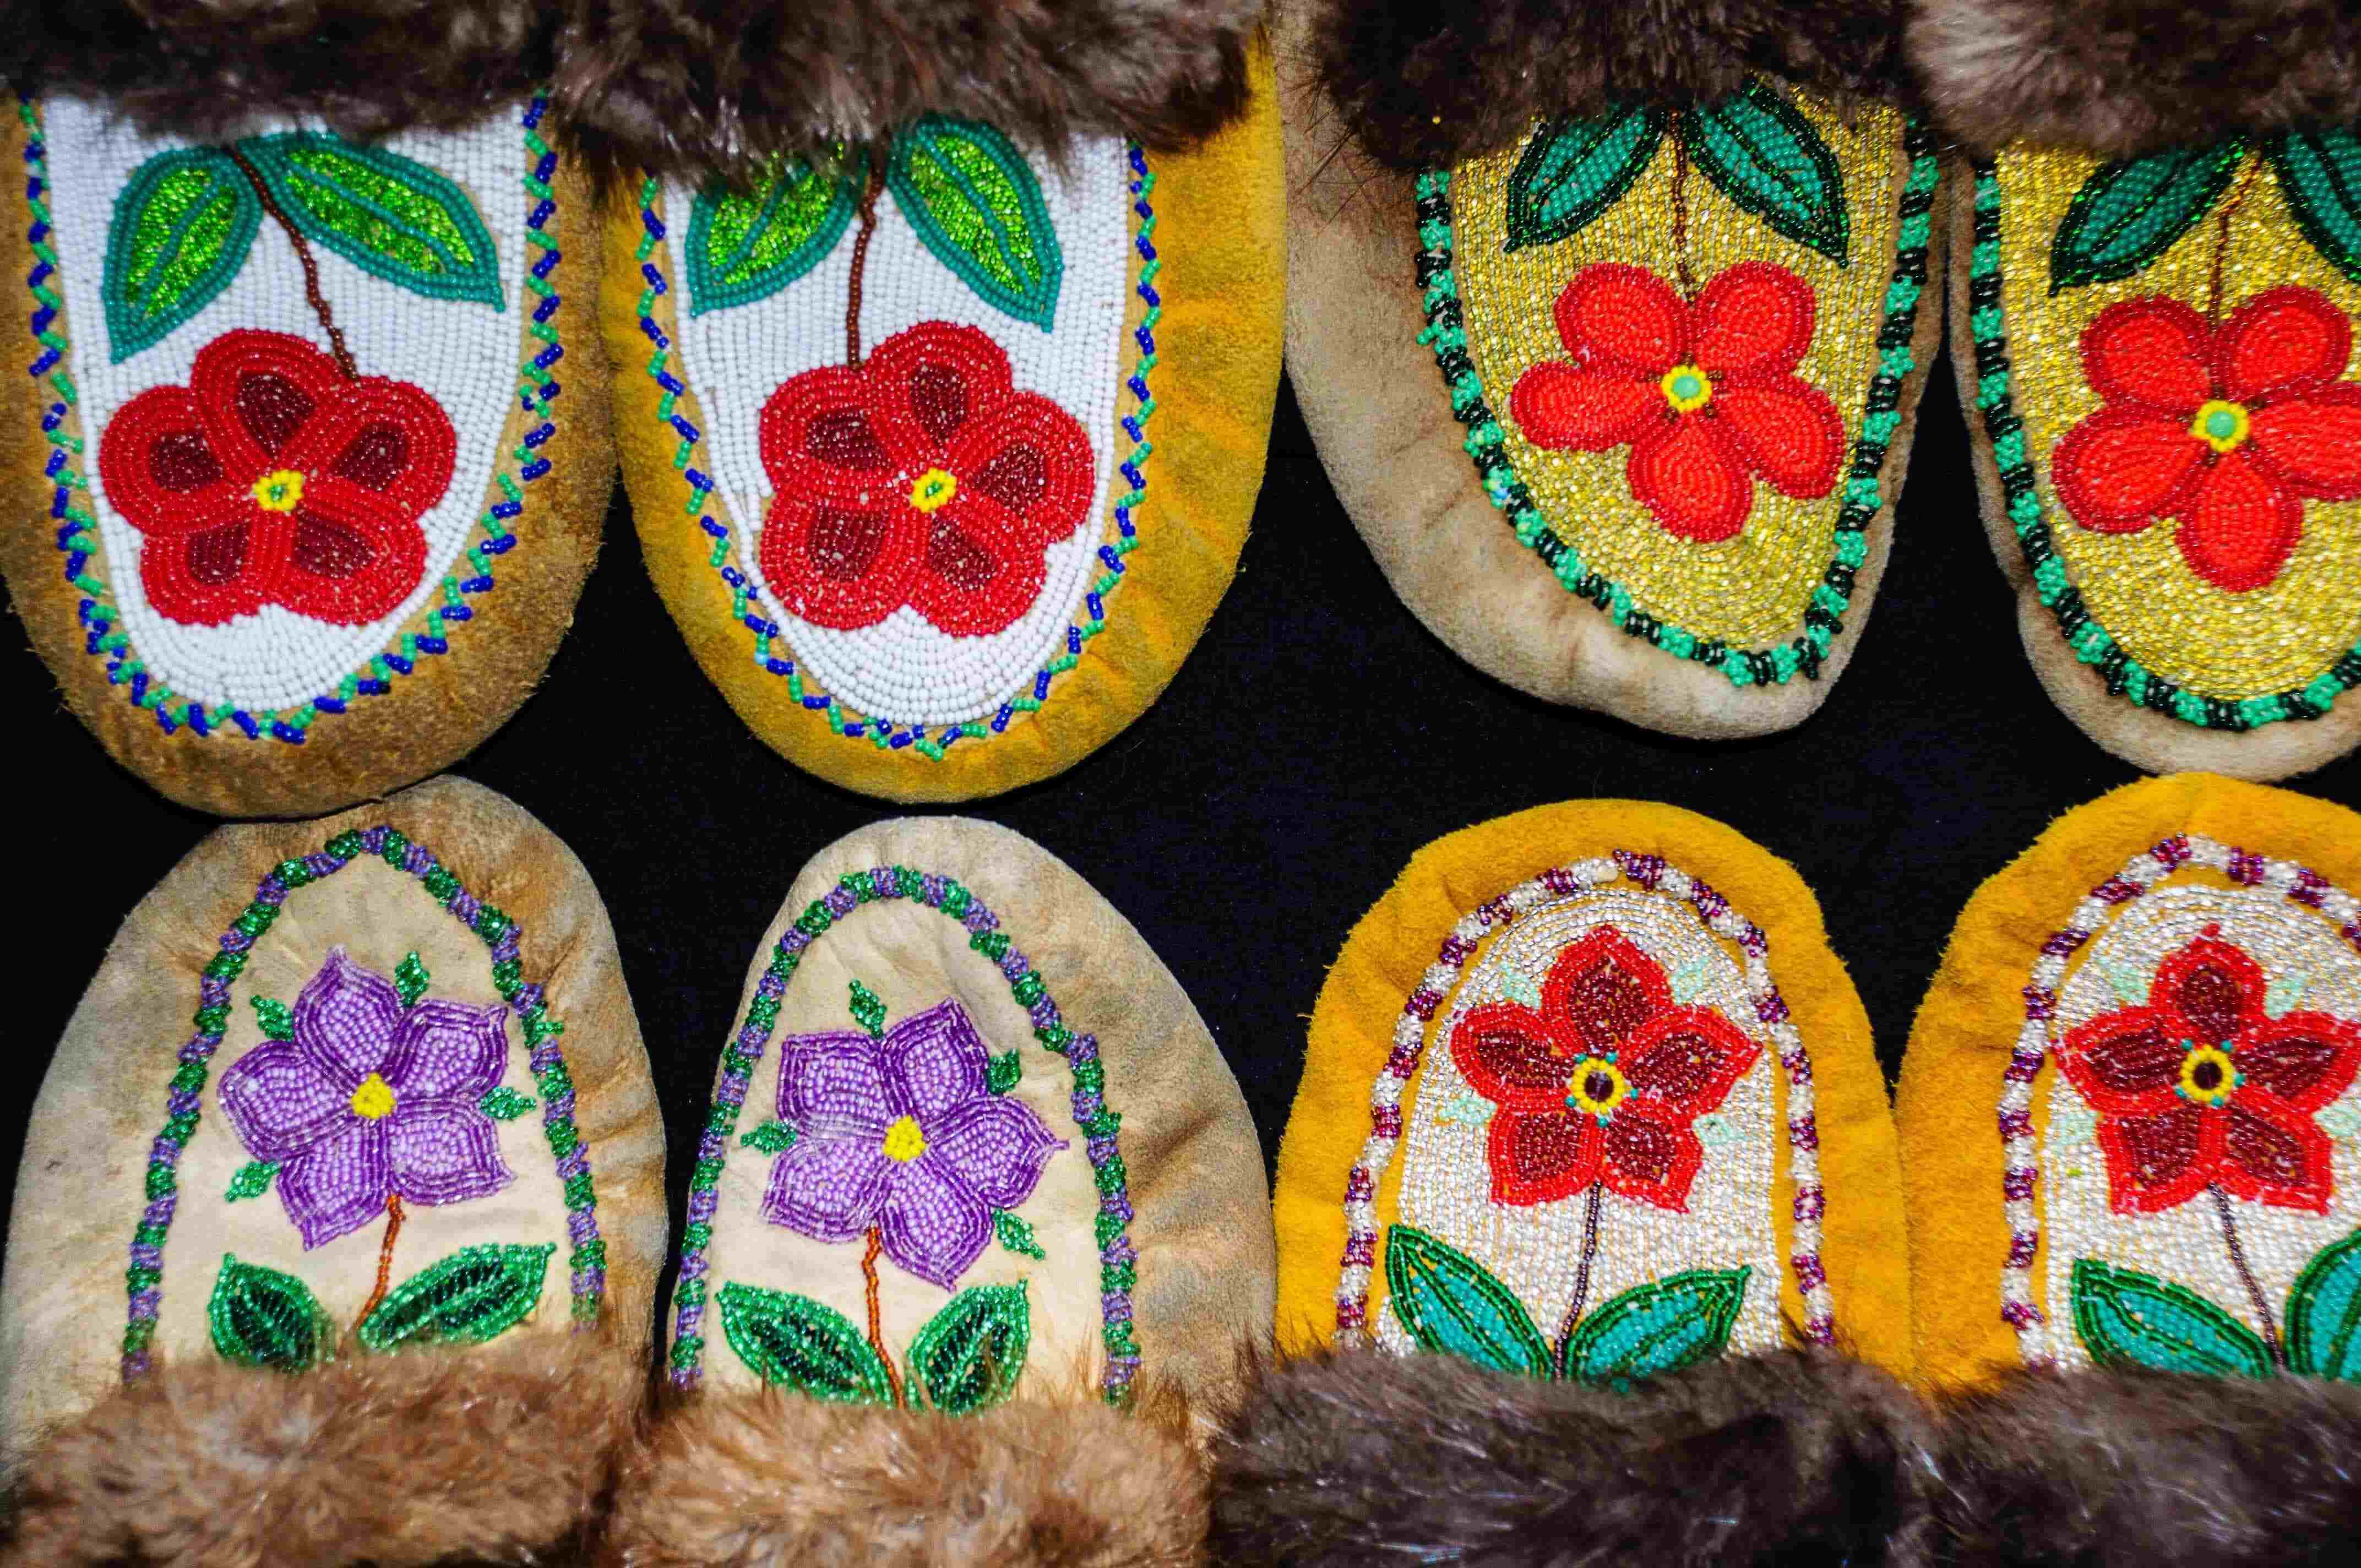 four pairs of beaded slippers